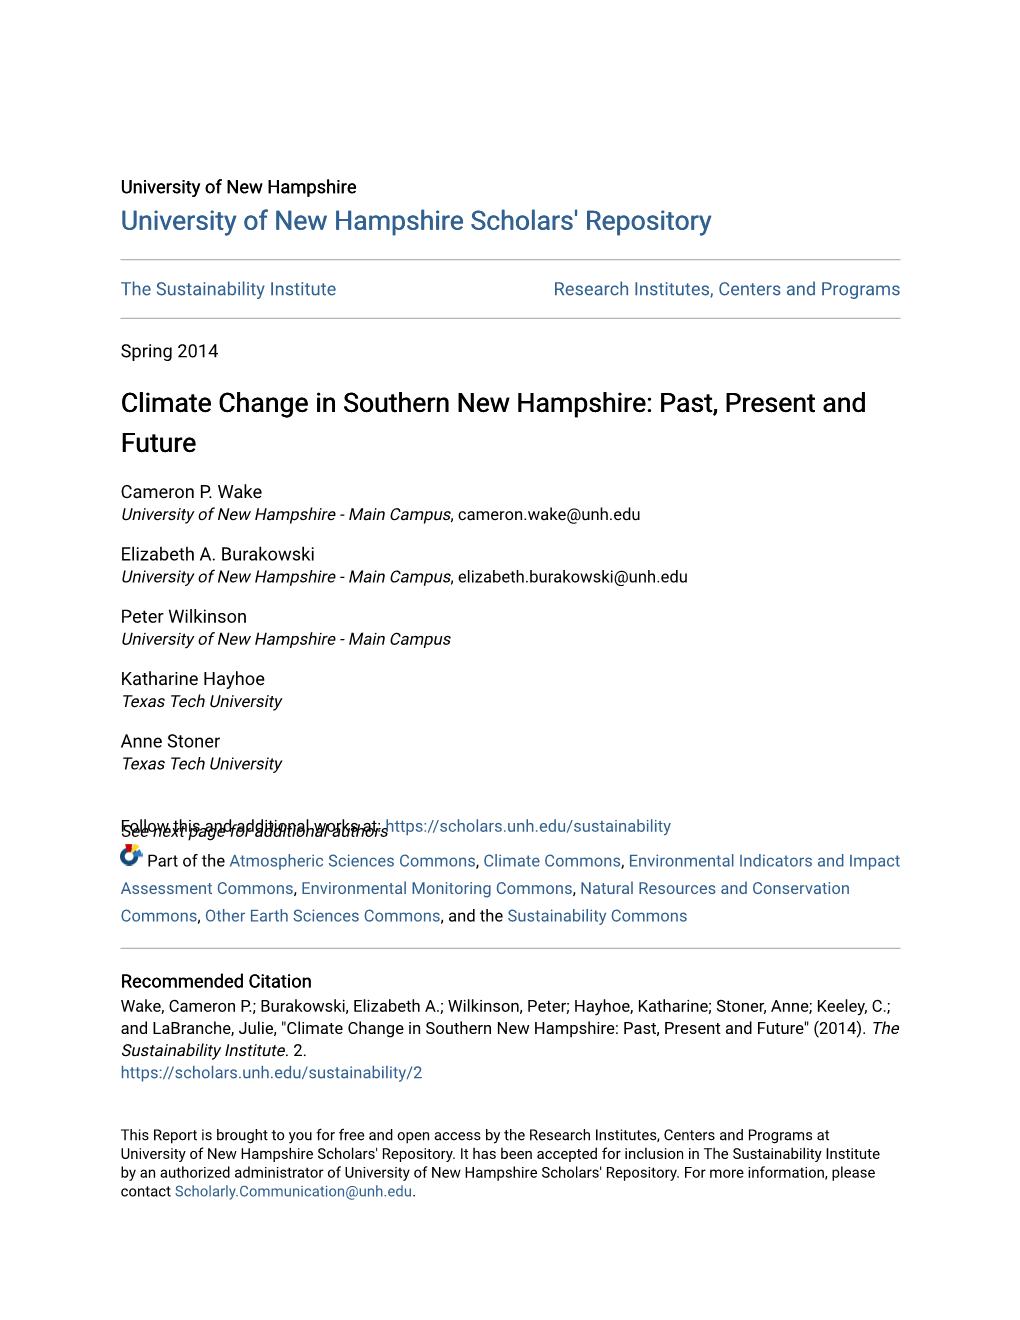 Climate Change in Southern New Hampshire: Past, Present and Future